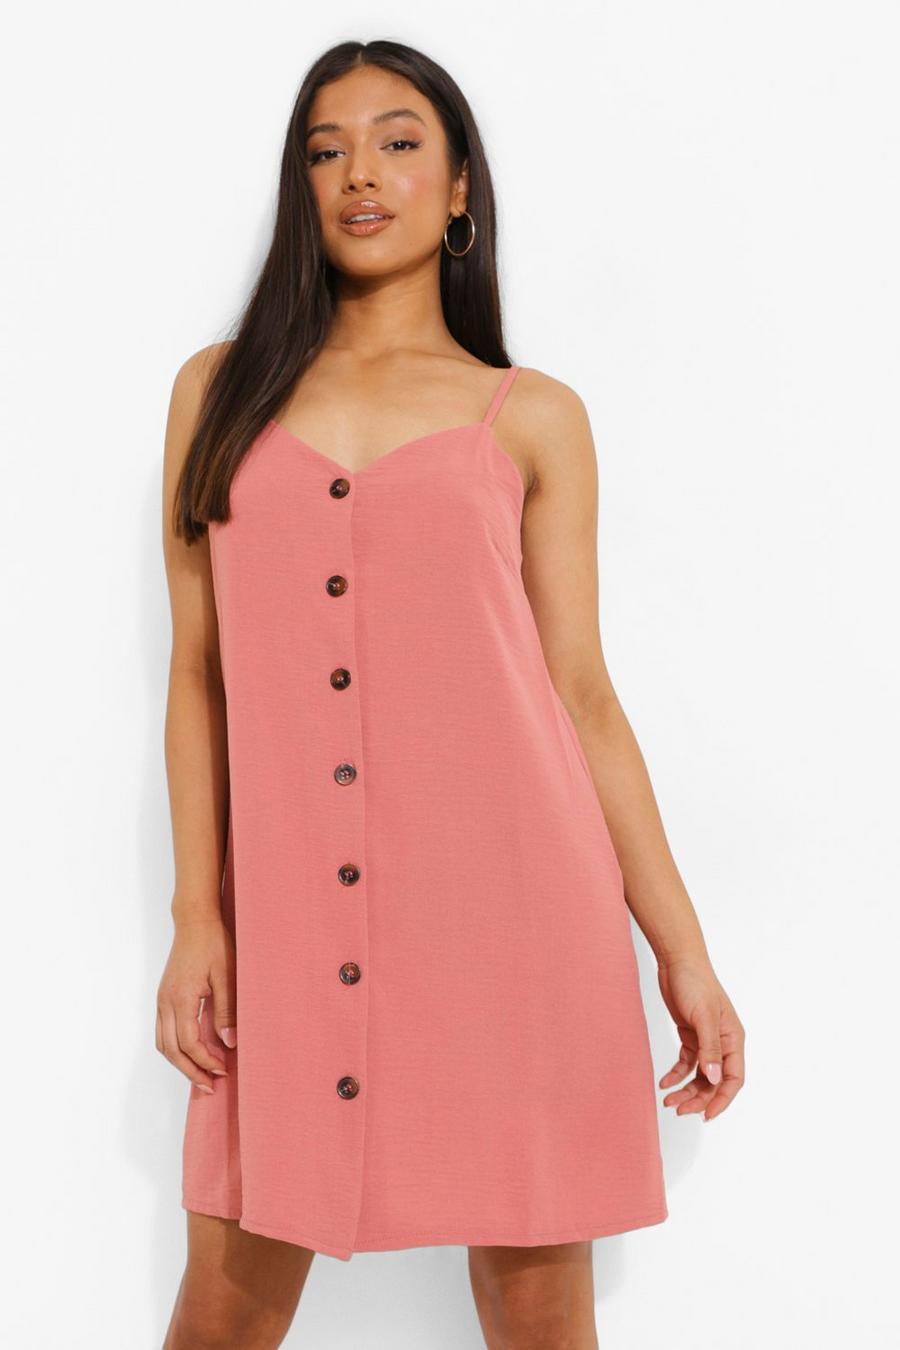 Blush pink Petite Button Front Strappy Swing Dress